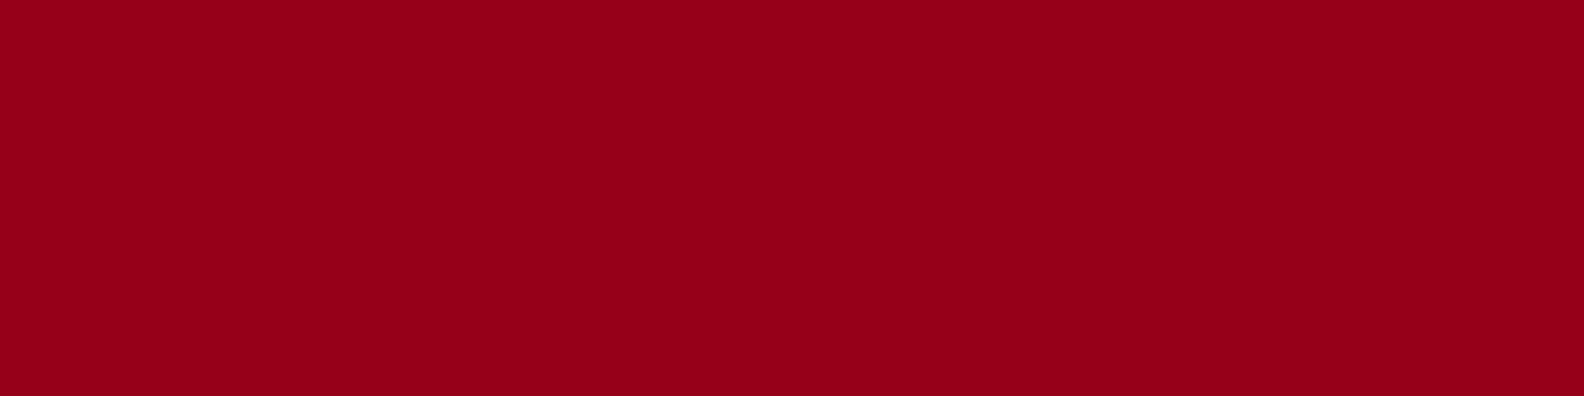 1584x396 Carmine Solid Color Background